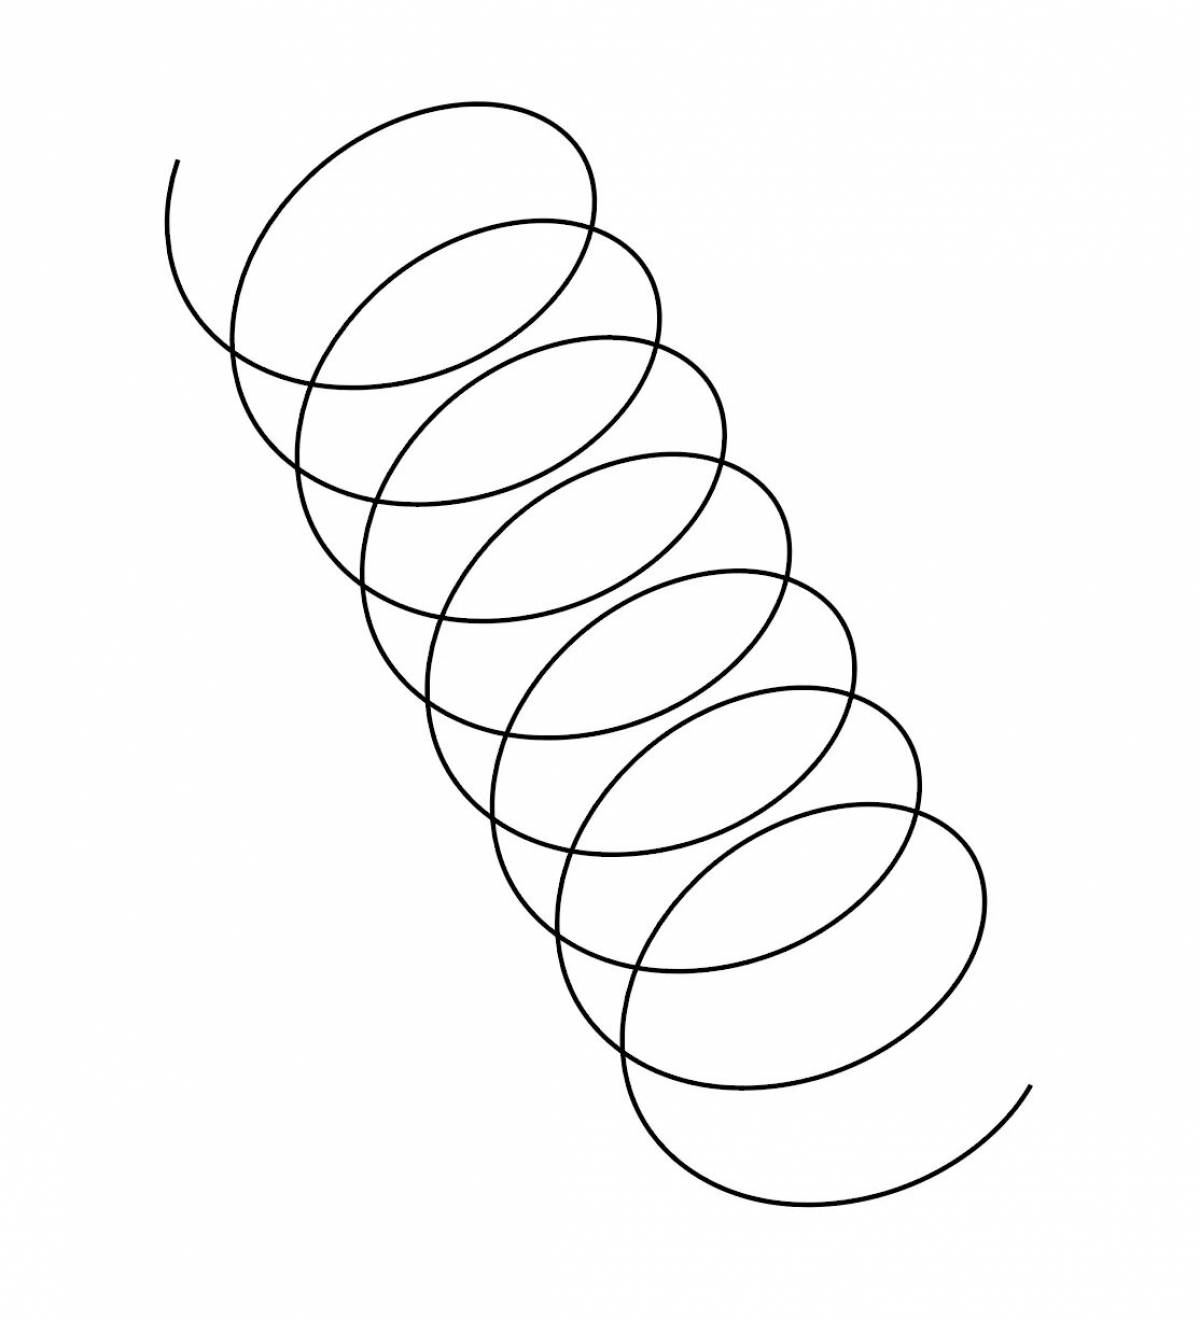 Coloring page with swirling lines